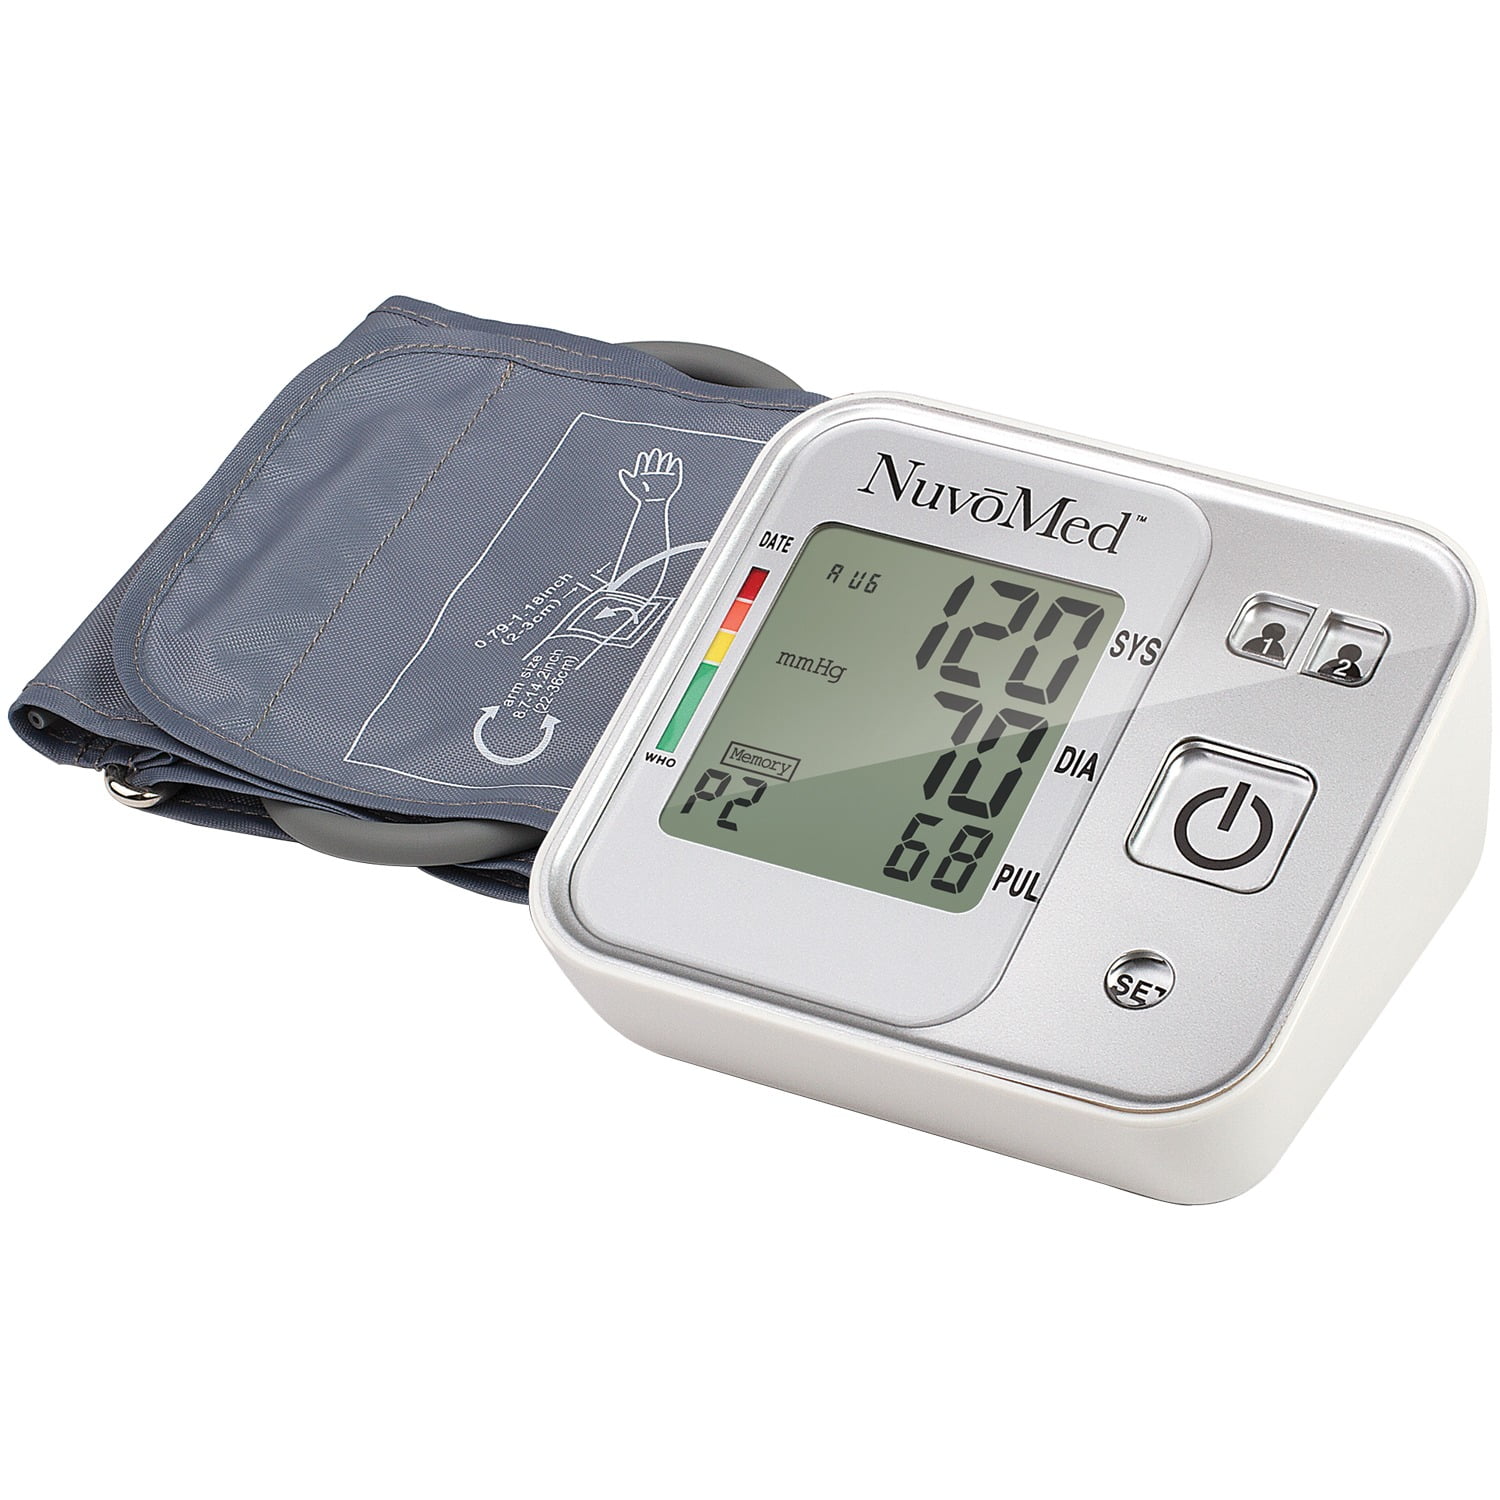 Homedics Upper Arm 500 Series Blood Pressure Monitor, Voice Out Guide, Easy Operation, Accurate Results, Size: One size, 9 inch - 17 inch